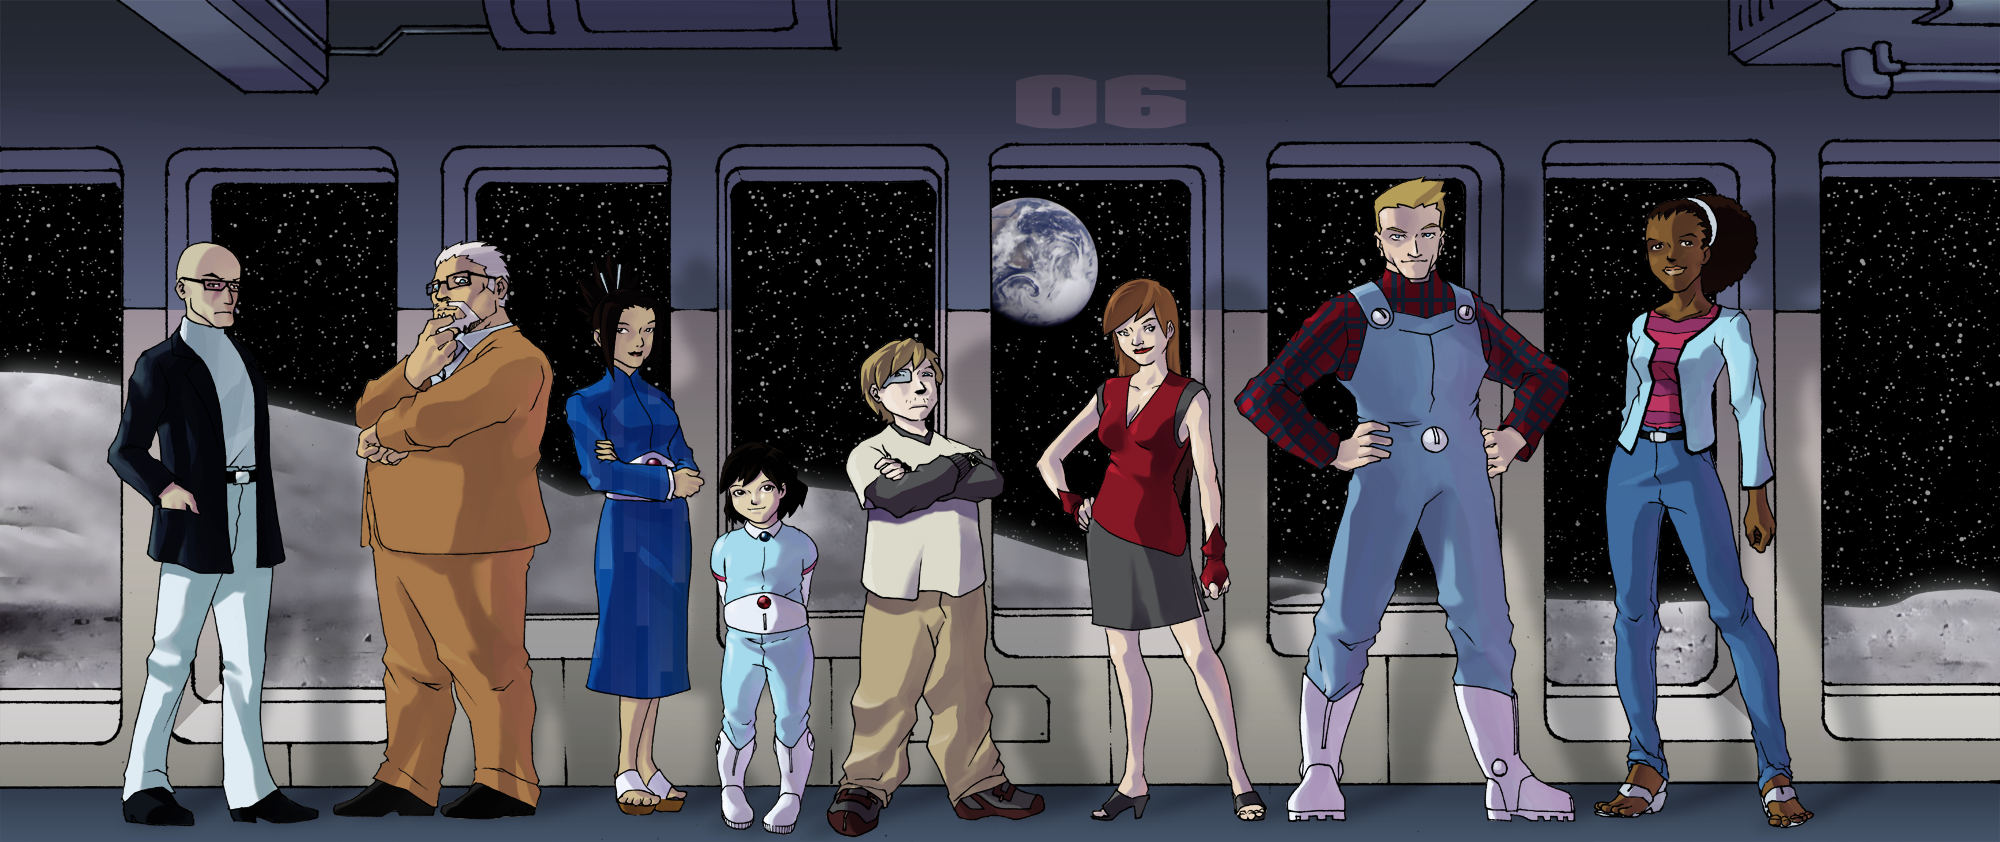 "The (animated) main cast standing in front of windows overlooking Earthrise on the Moon"